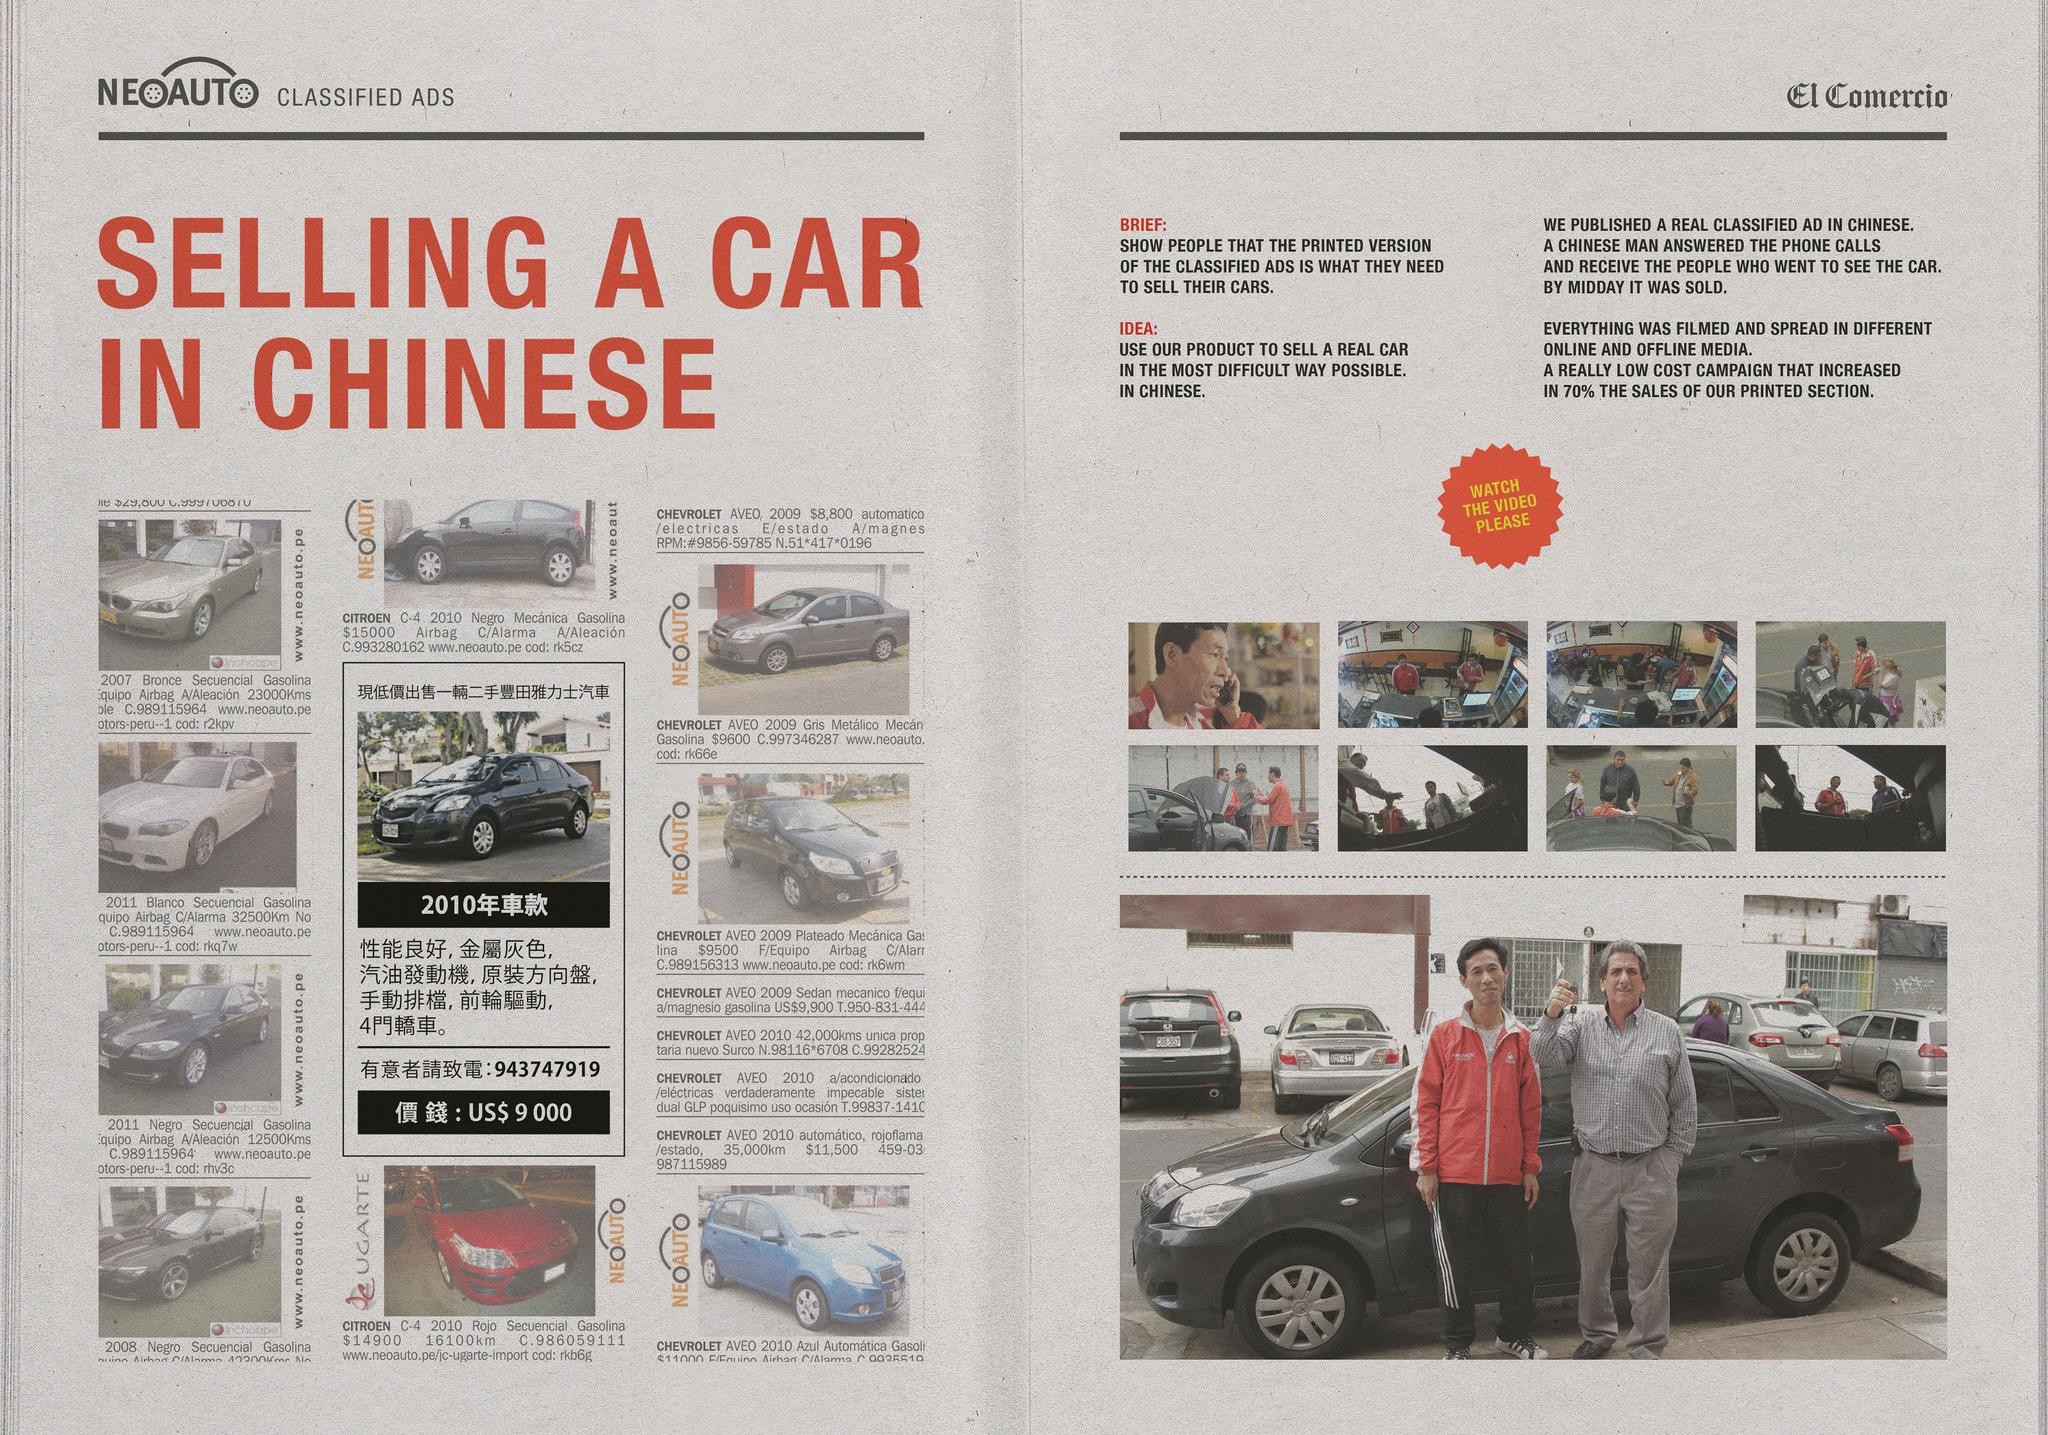 SELLING A CAR IN CHINESE